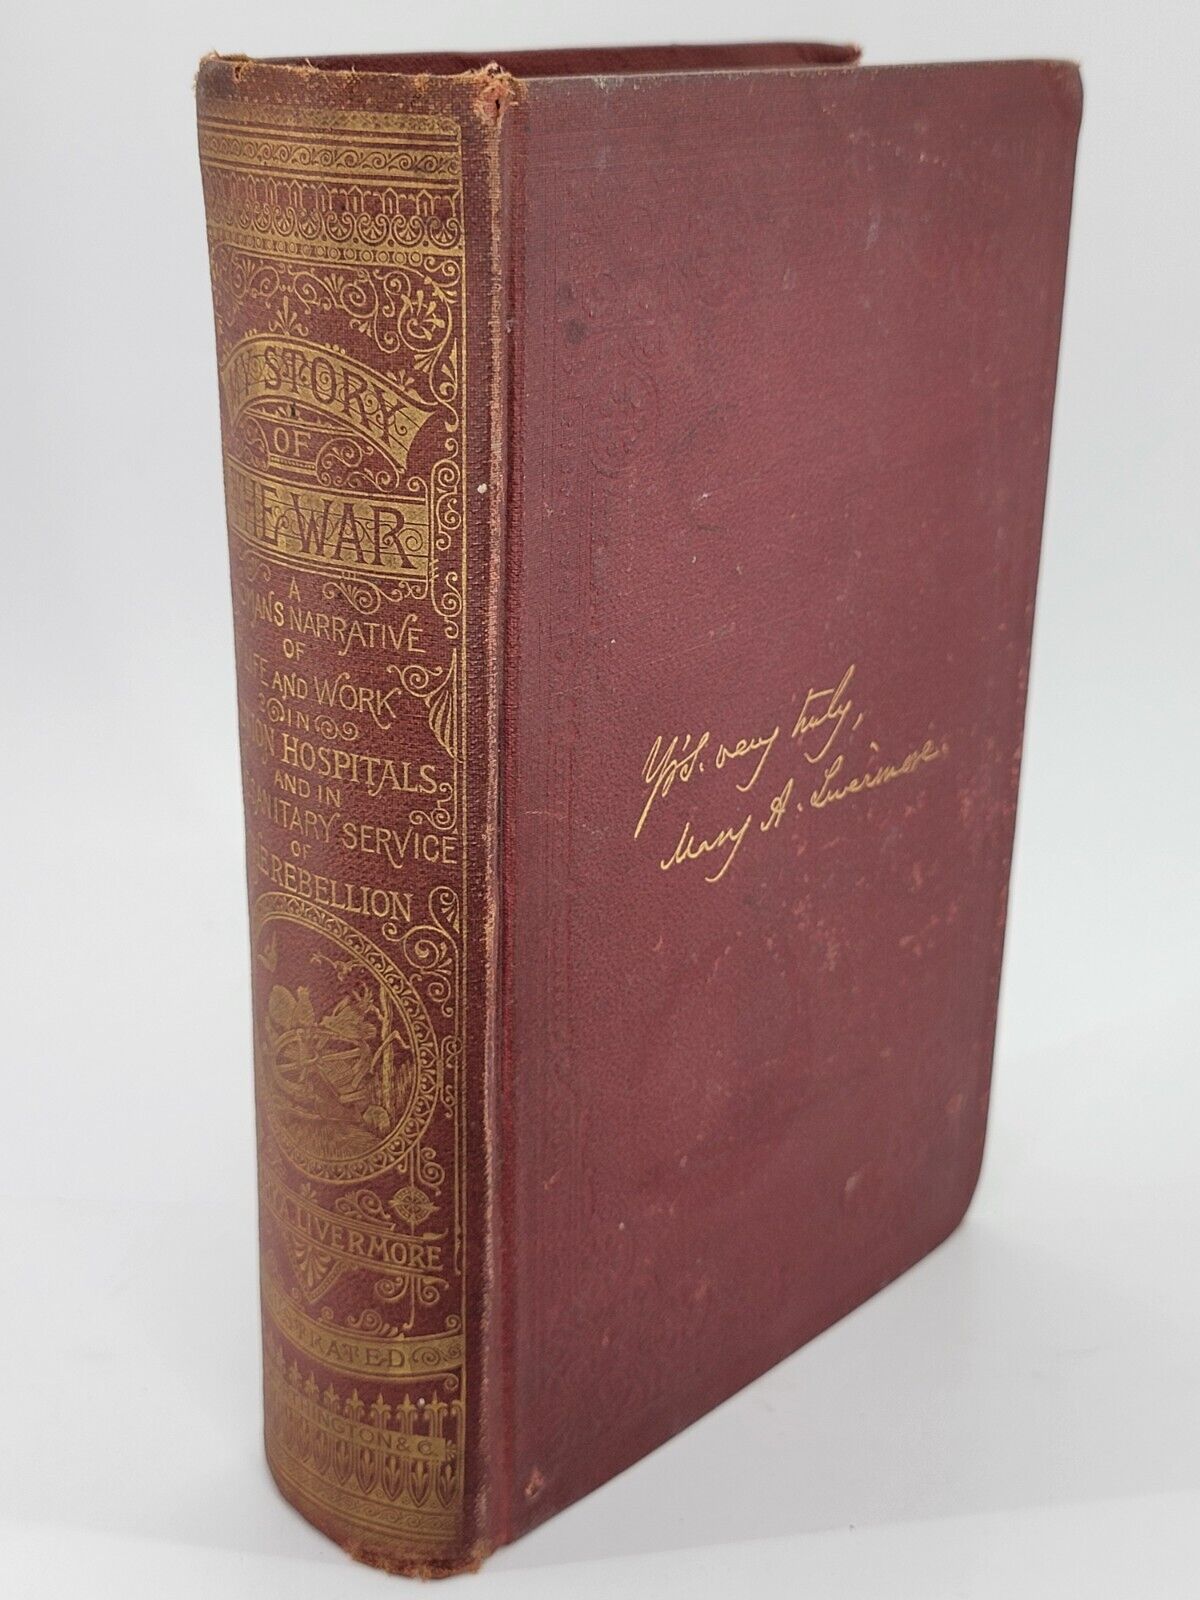 1889 My Story of the War: Narrative 4 Years Exp US Civil War by Mary Livermore